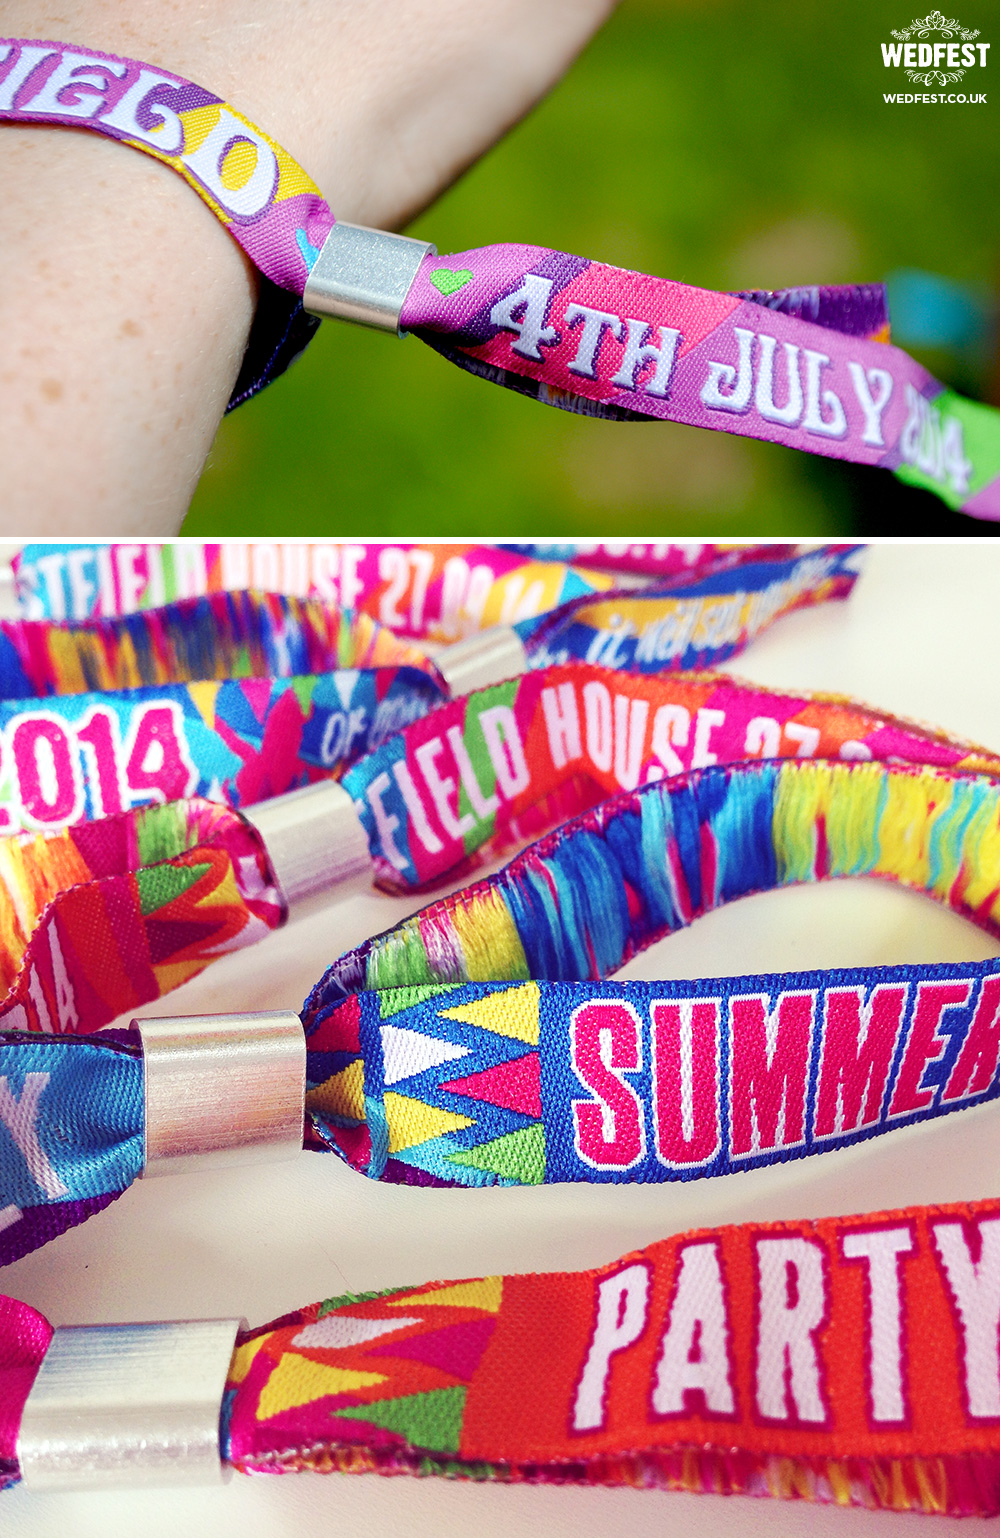 fabric wristbands from wedfest